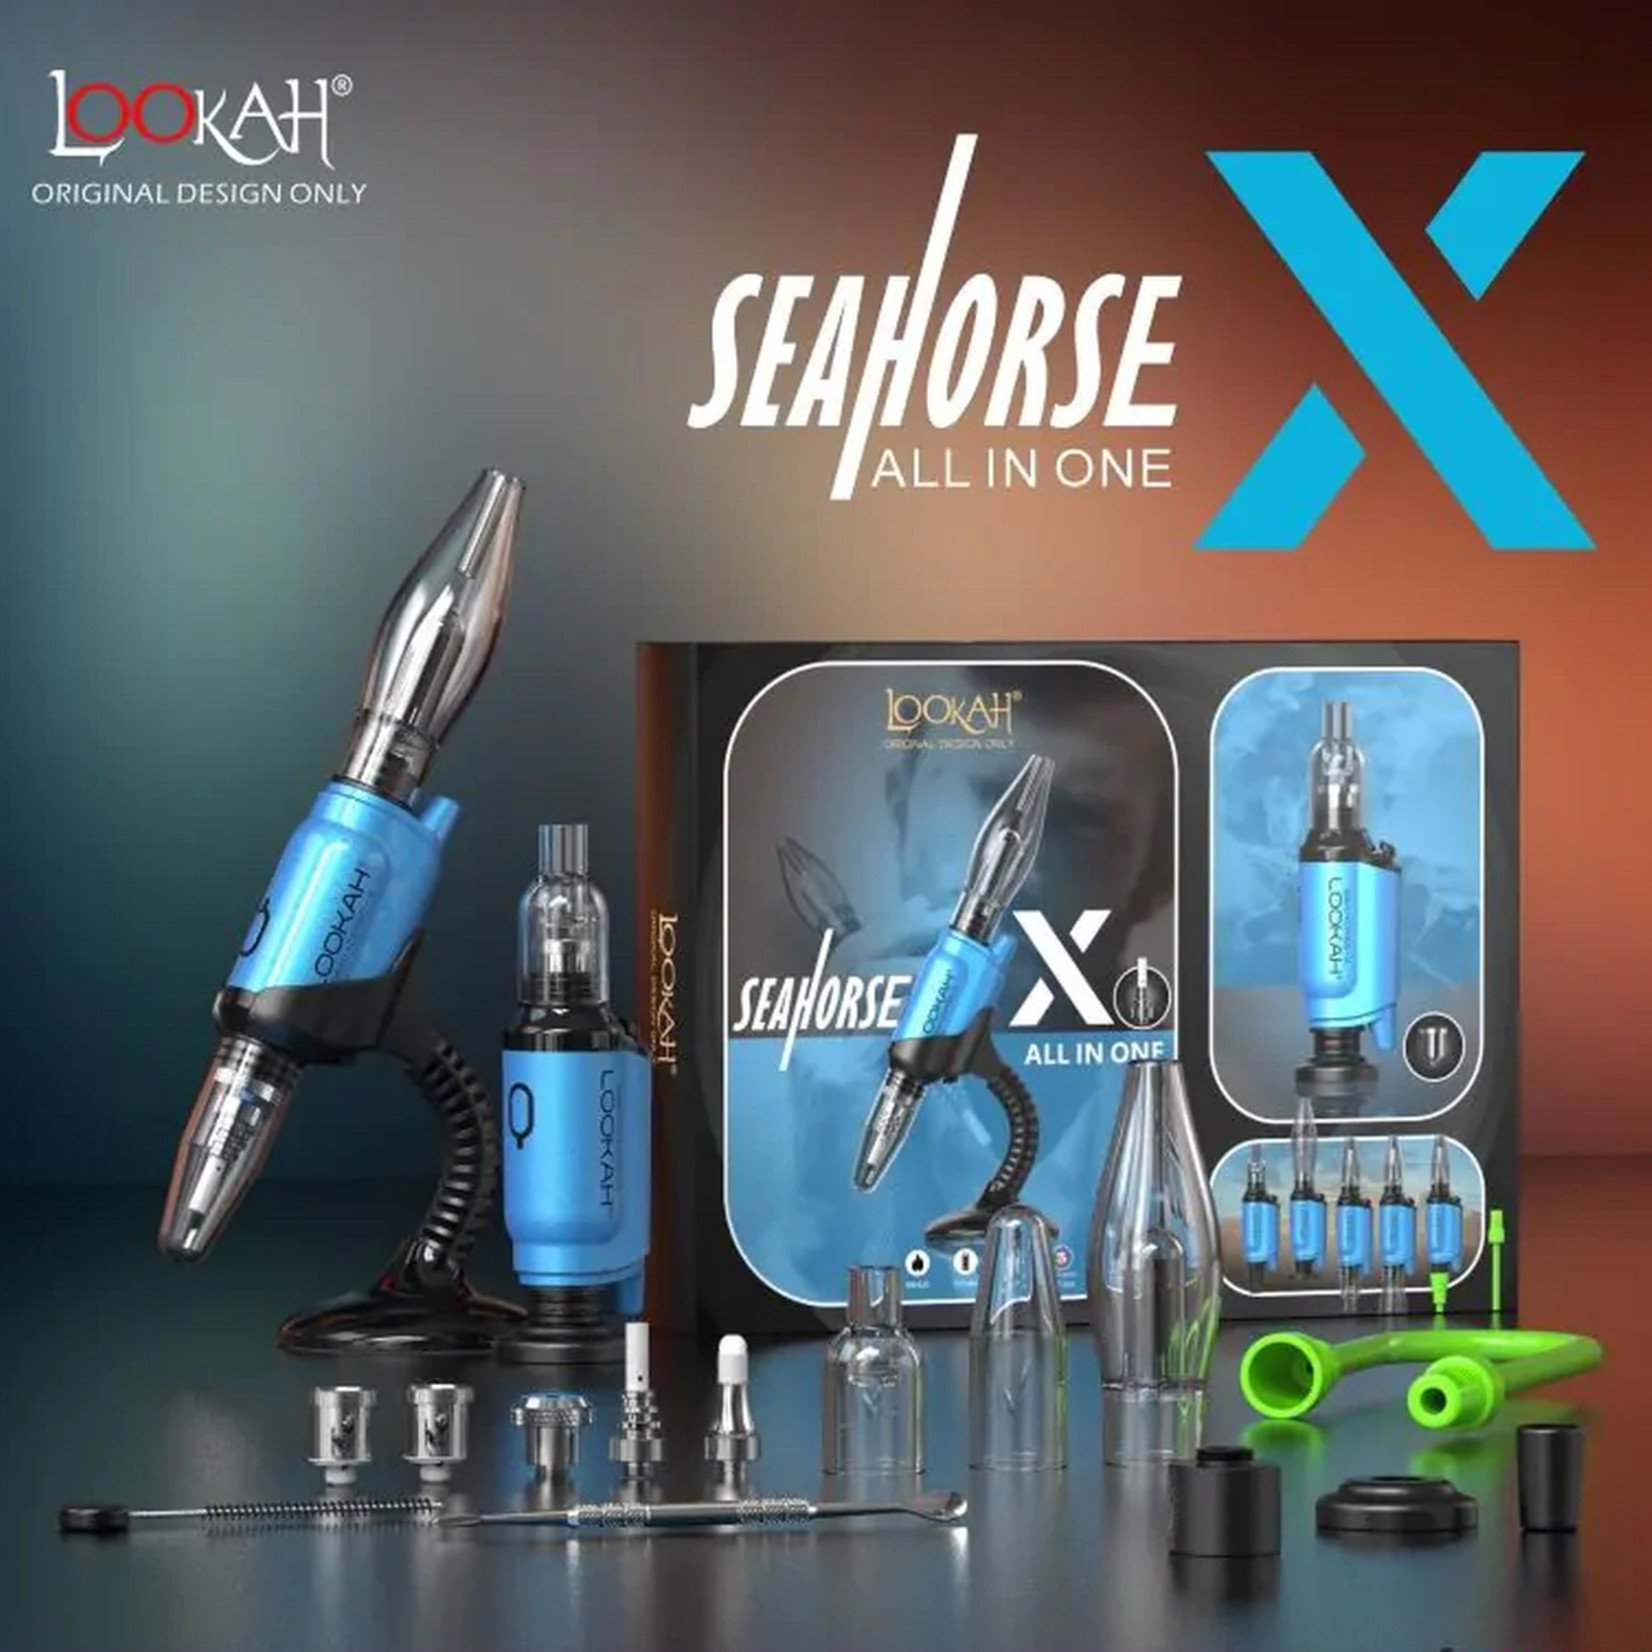 LOOKAH SEAHORSE X ALL IN ONE (VARIOUS COLORS)